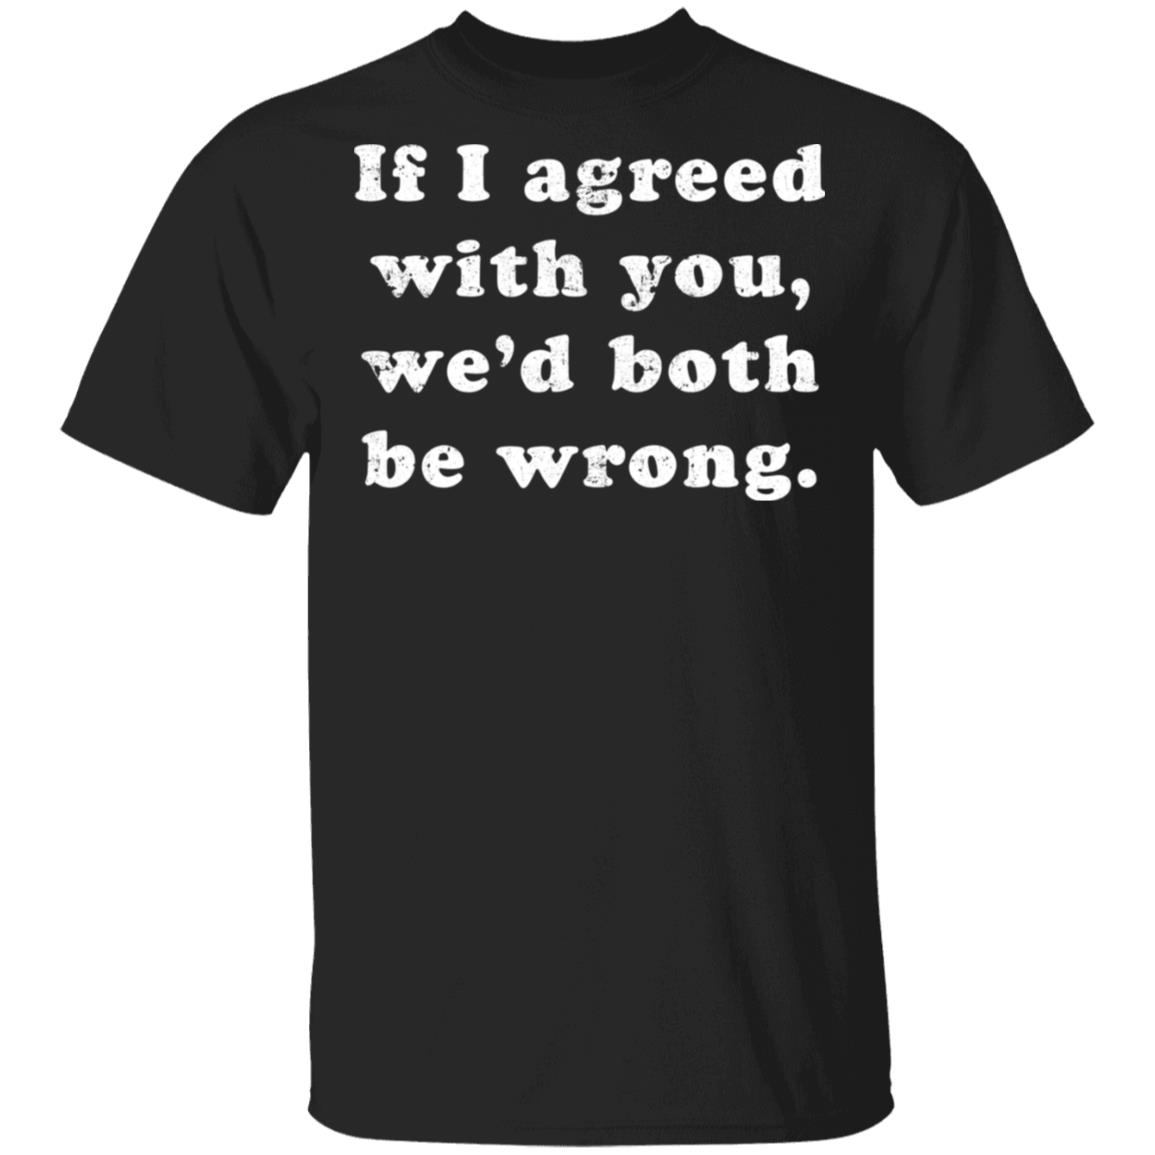 If I agreed with you we'd both be wrong shirt, hoodie